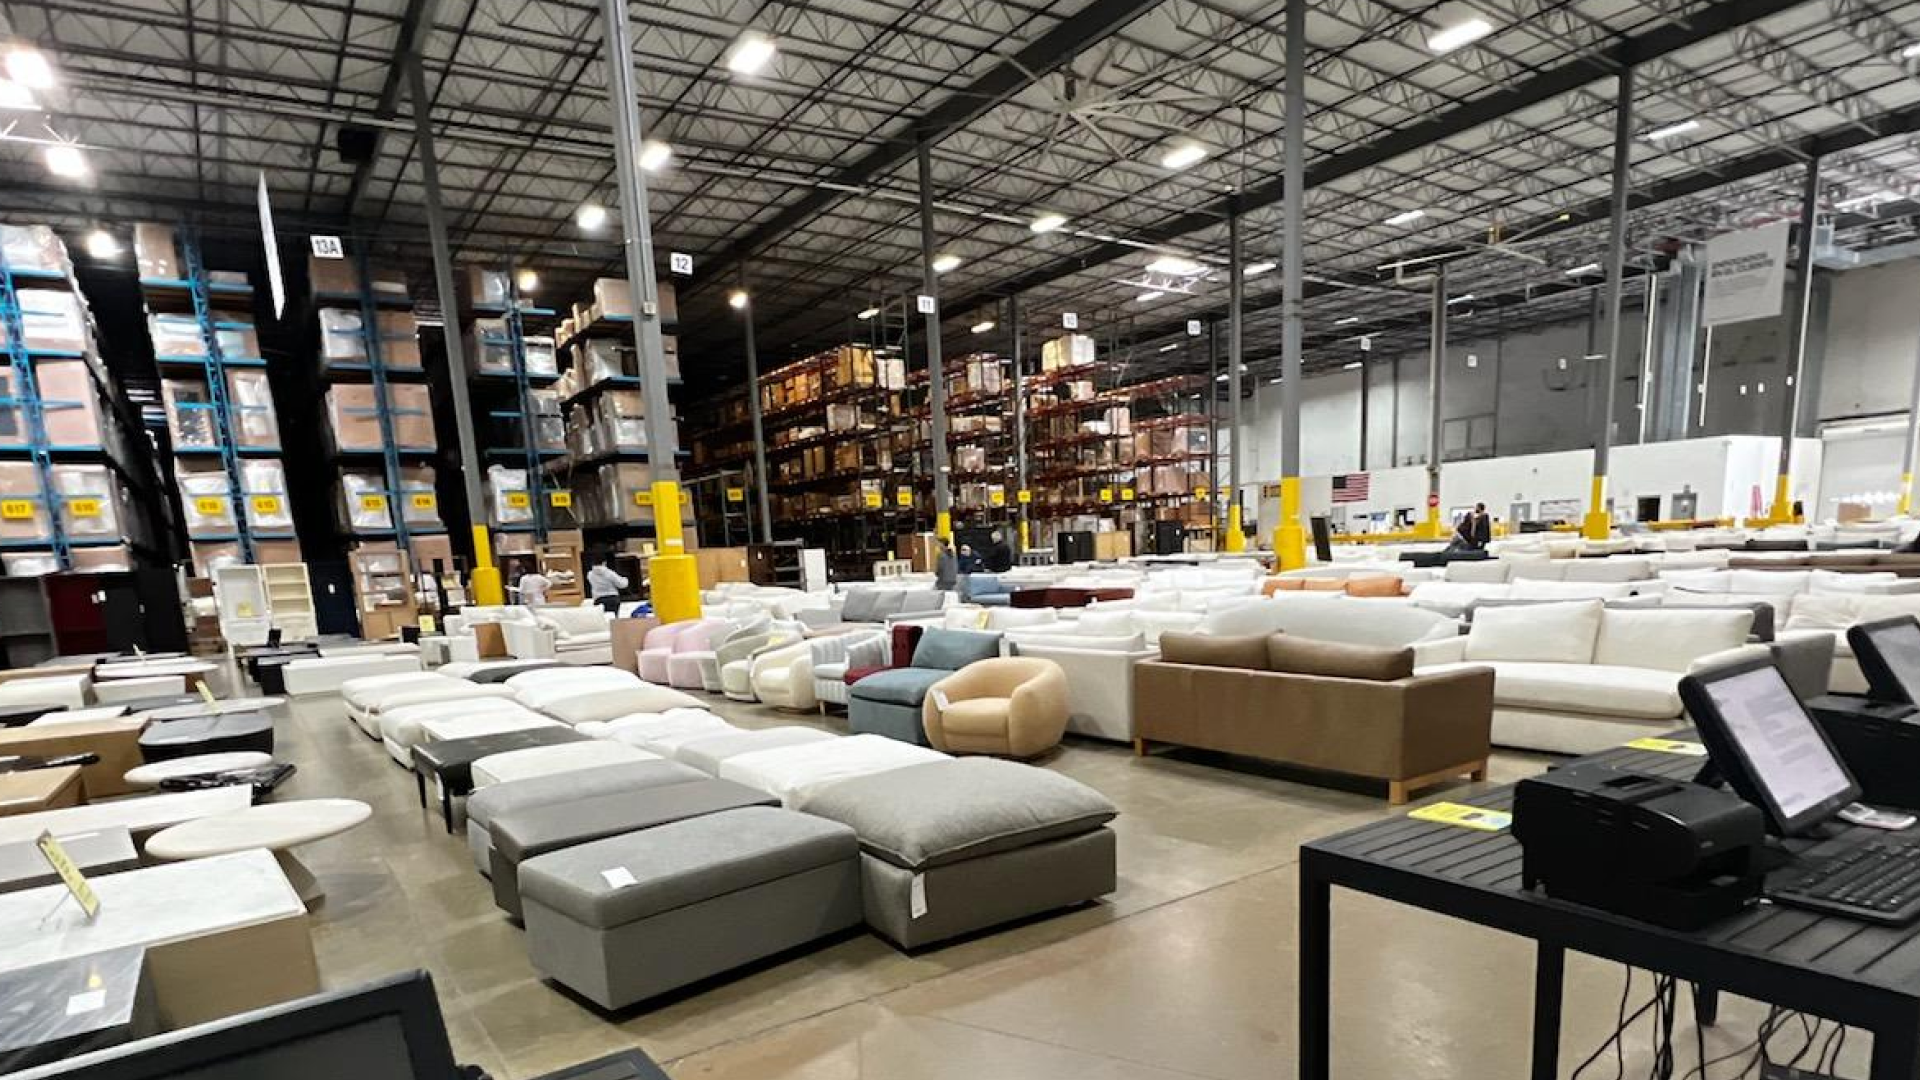 That Outlet Girl: How to find the best furniture outlet near you